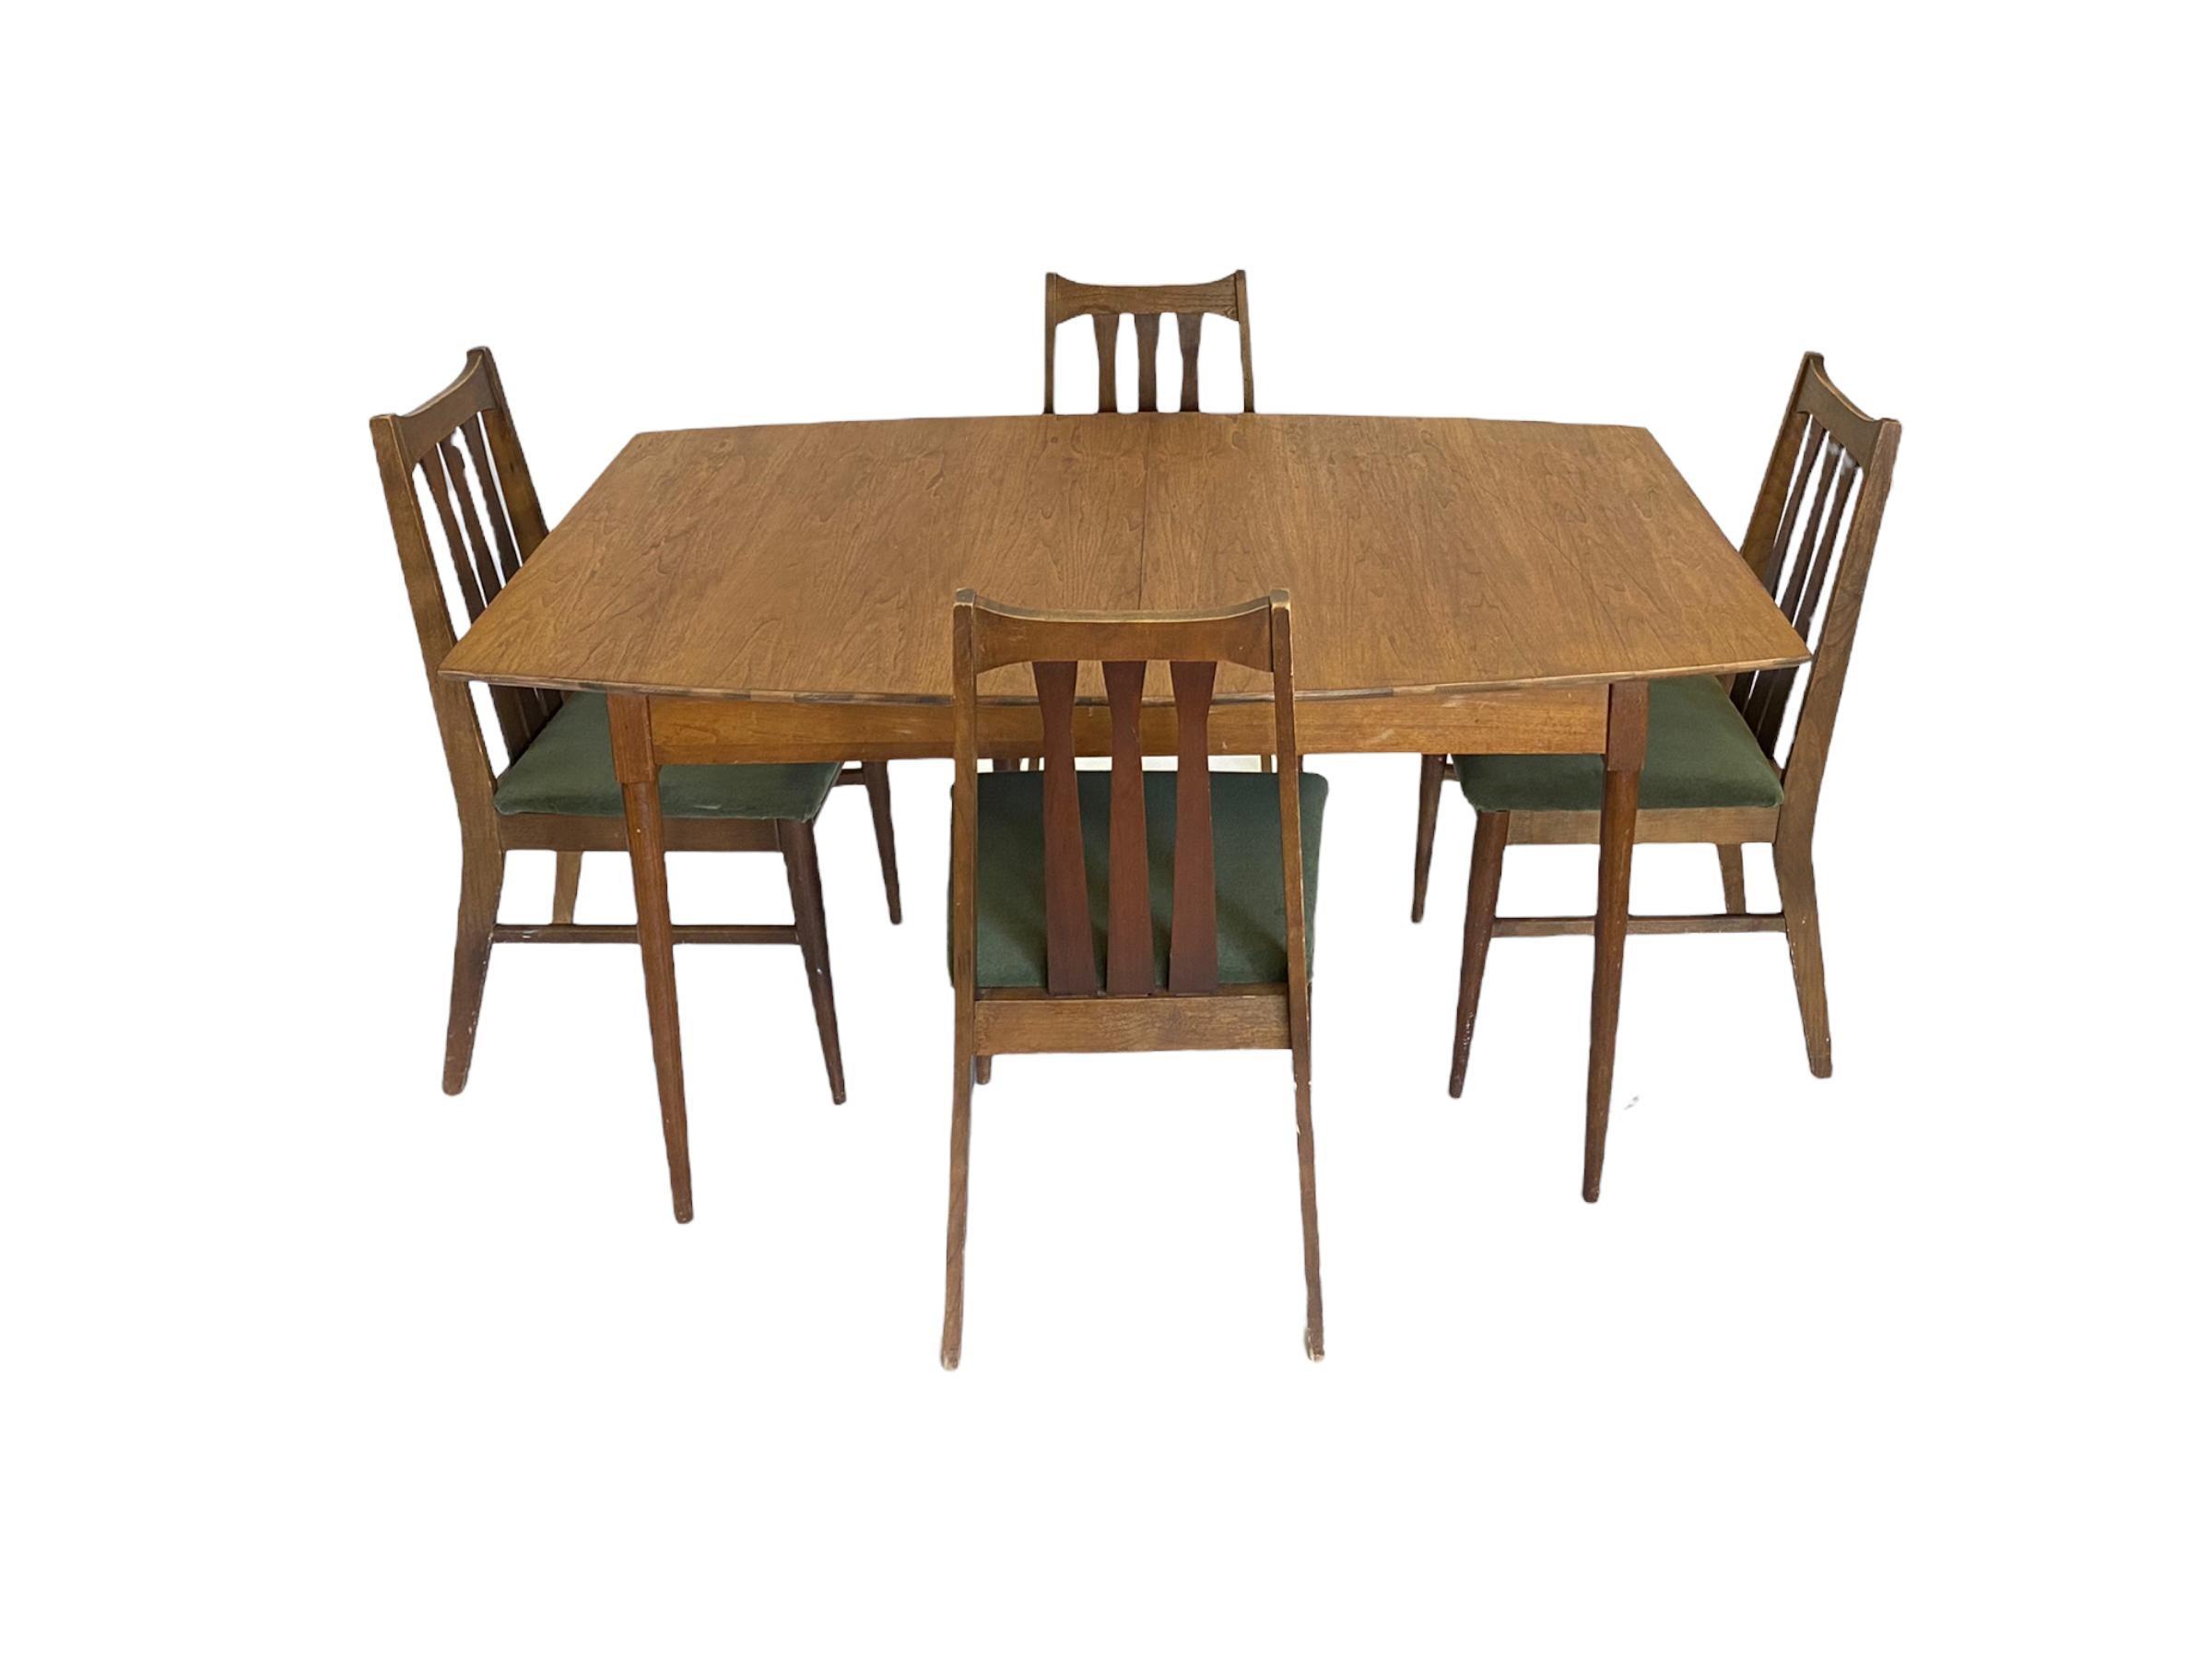 Mid-Century Modern dining set with walnut table and american made walnut dining chairs. The table has been refinished. The chairs feaure bowtie shape splat back and are recently reupholstered in dark green velvet-like material. Good vintage